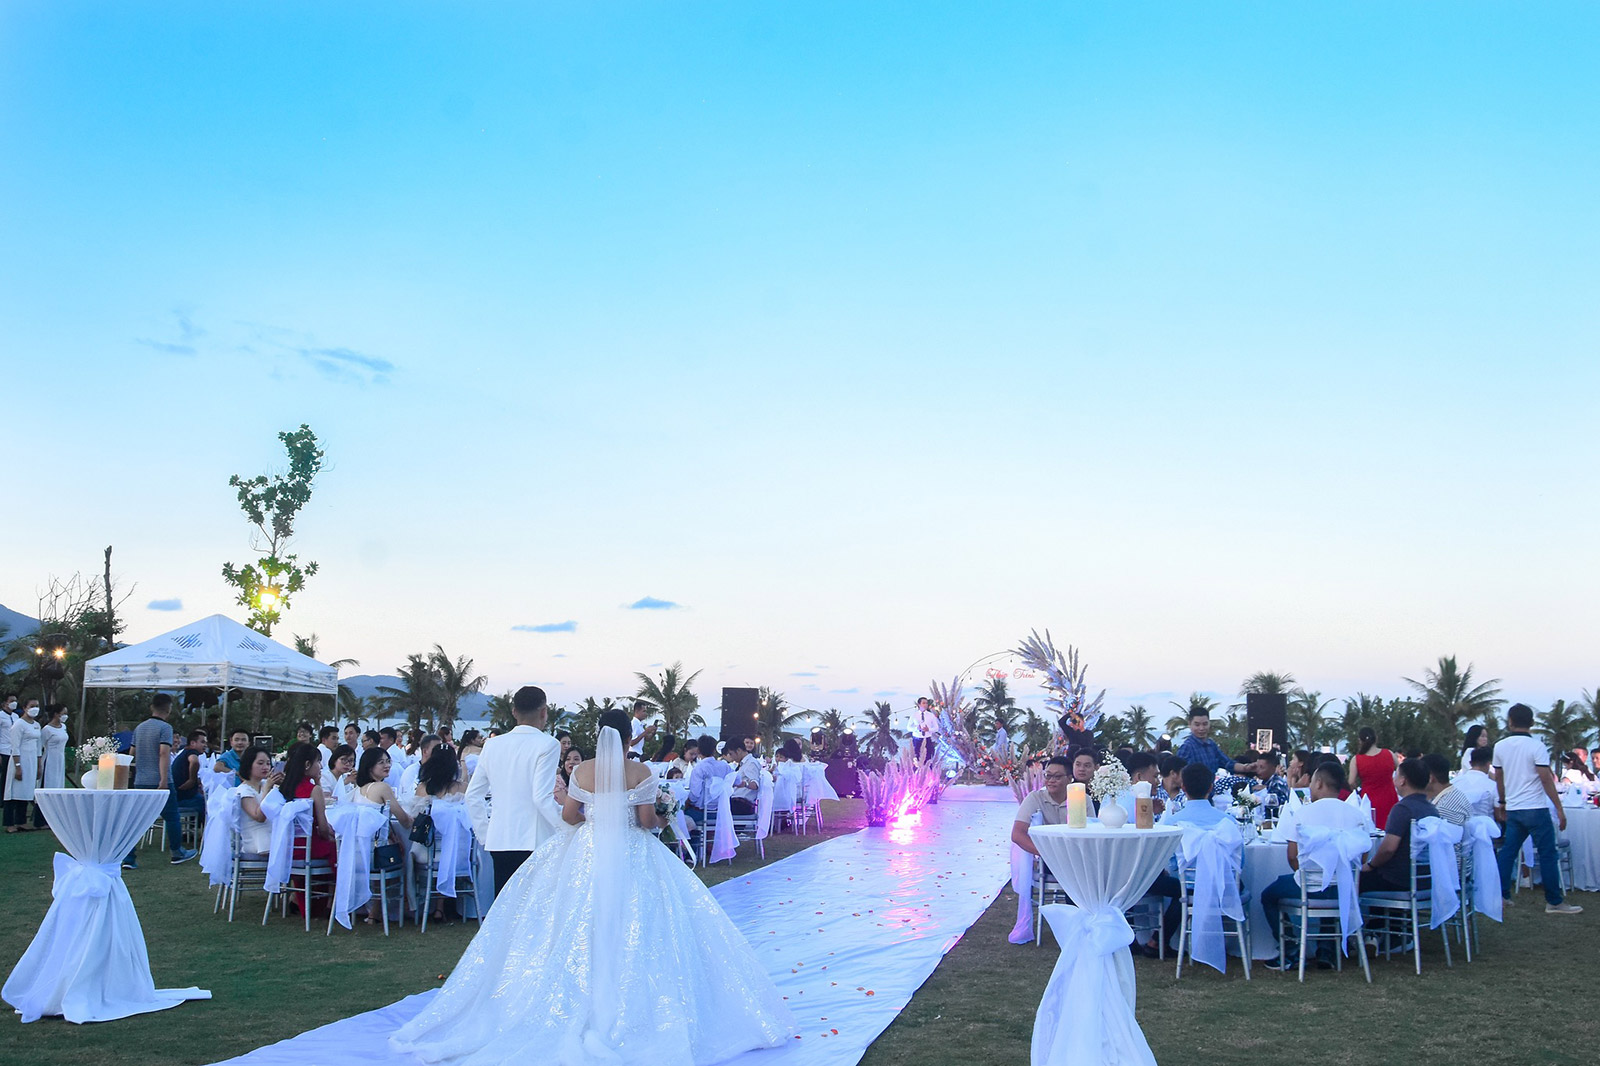 A PICTURESQUE WEDDING CEREMONY QUOC THIEN – TO TRINH AT ARIYANA CONVENTION CENTRE DANANG